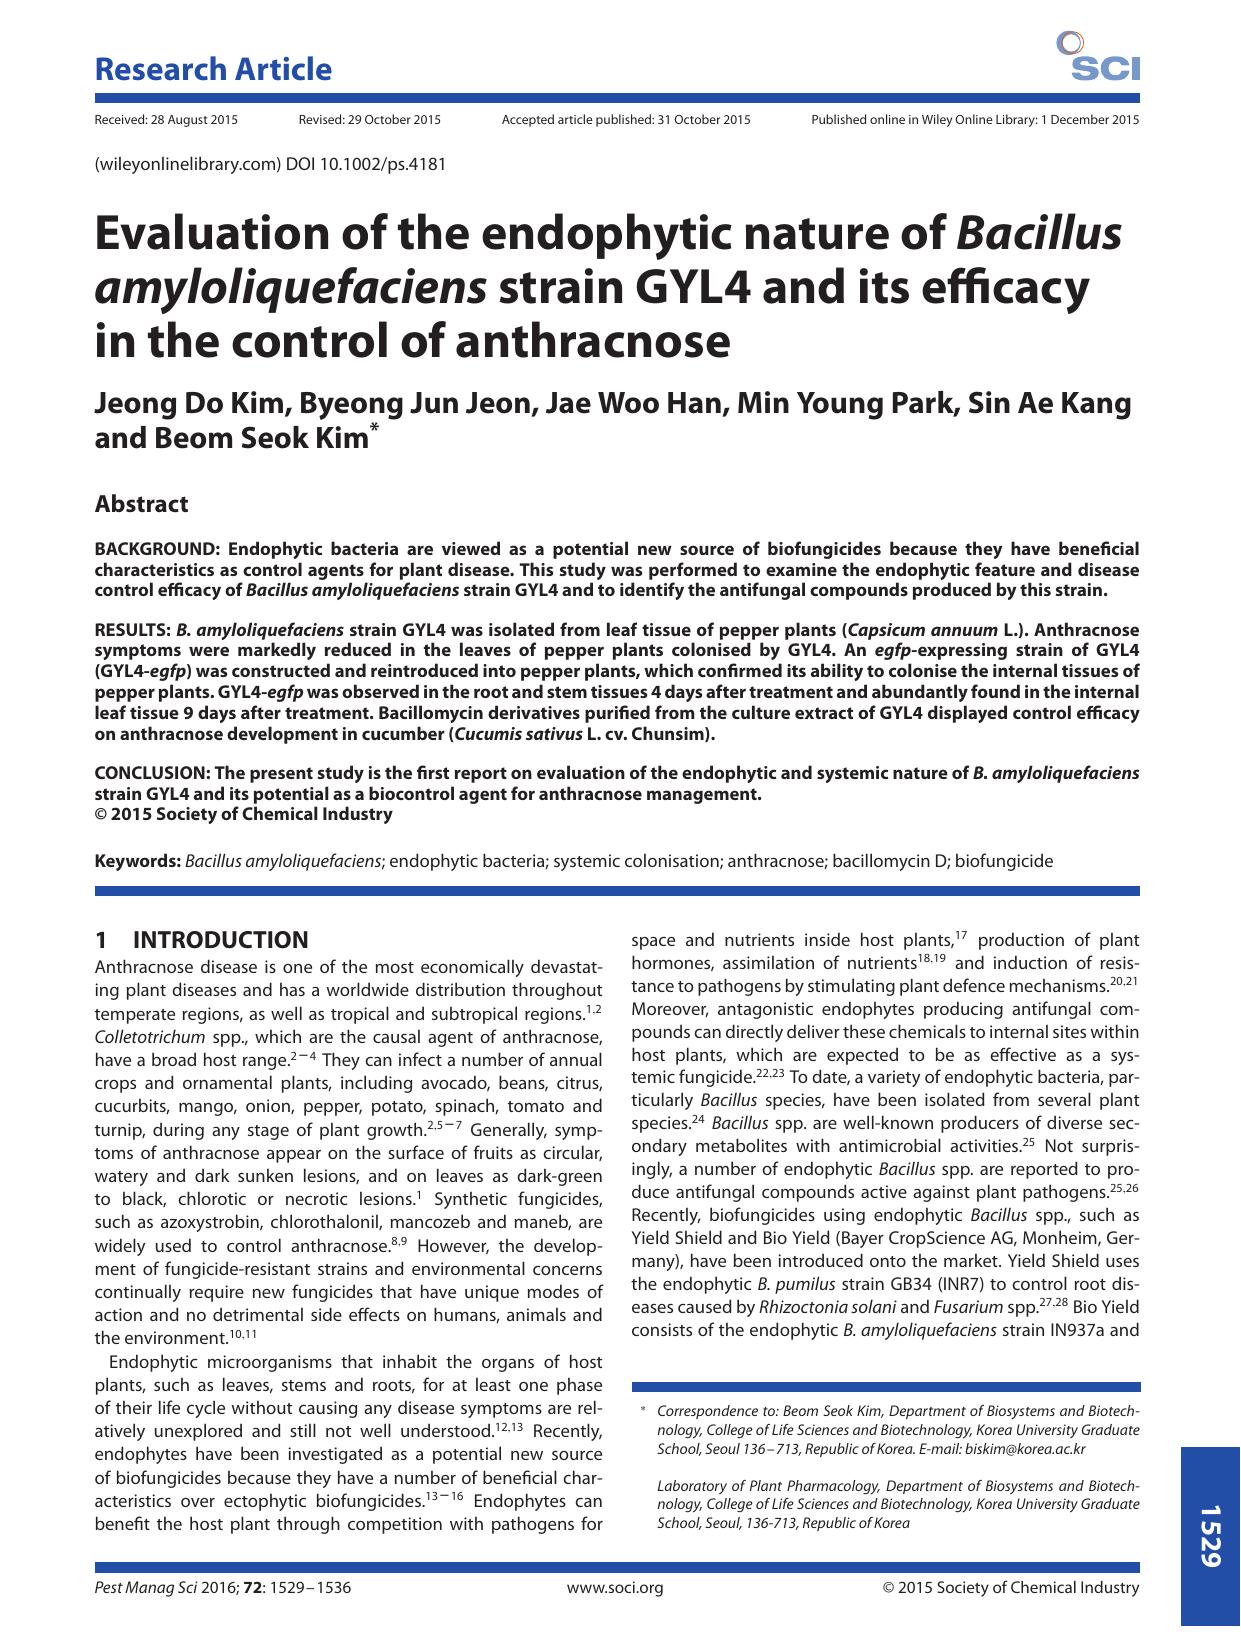 Evaluation of the endophytic nature of Bacillus amyloliquefaciens strain GYL4 and its efficacy in the control of anthracnose by Unknown